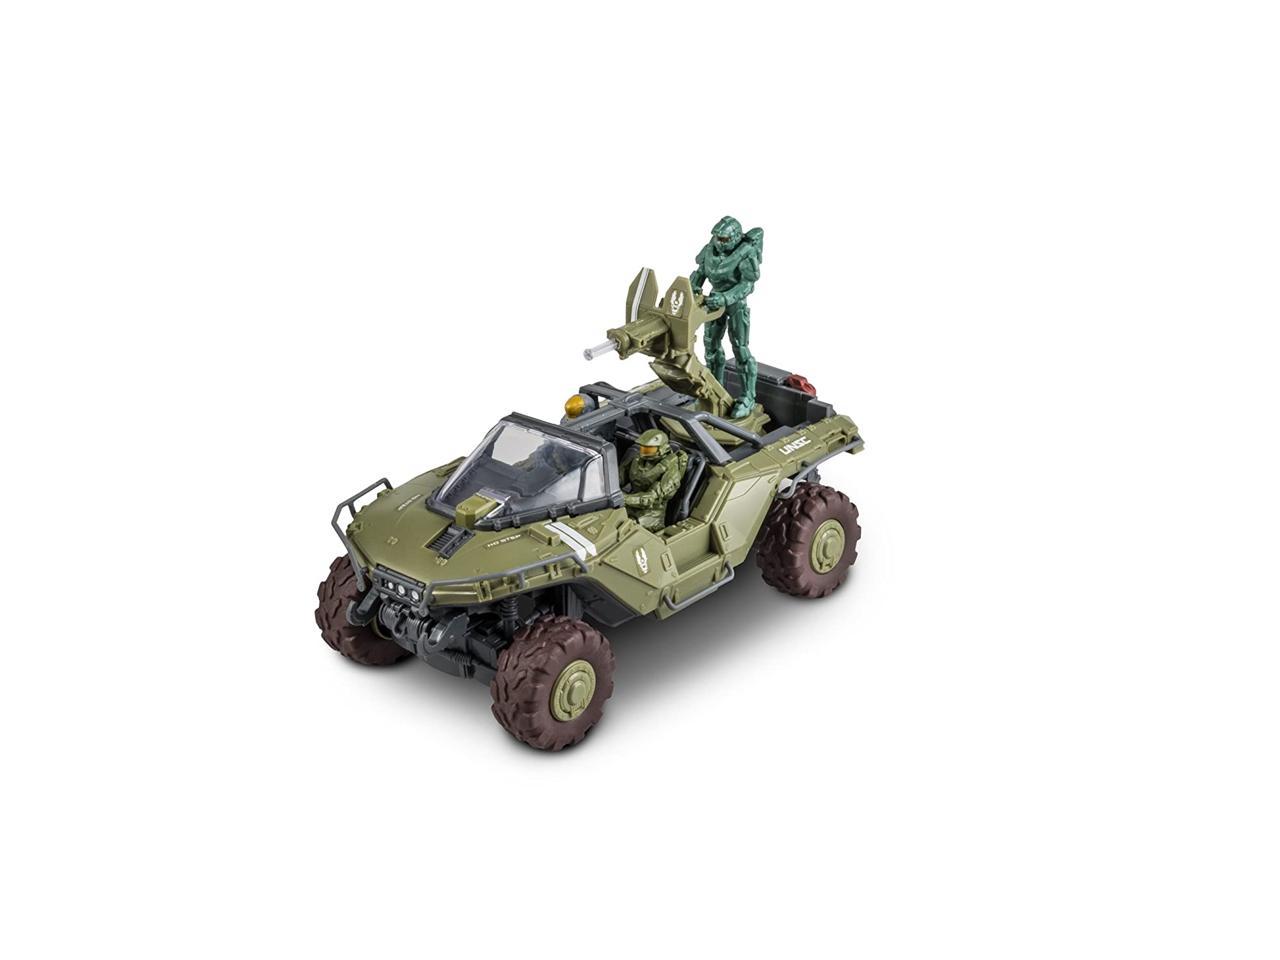 Details about   REVELL HALO UNSC WARTHOG BUILD & PLAY SNAP-TITE MODEL KIT w/LIGHTS & SOUND NEW 